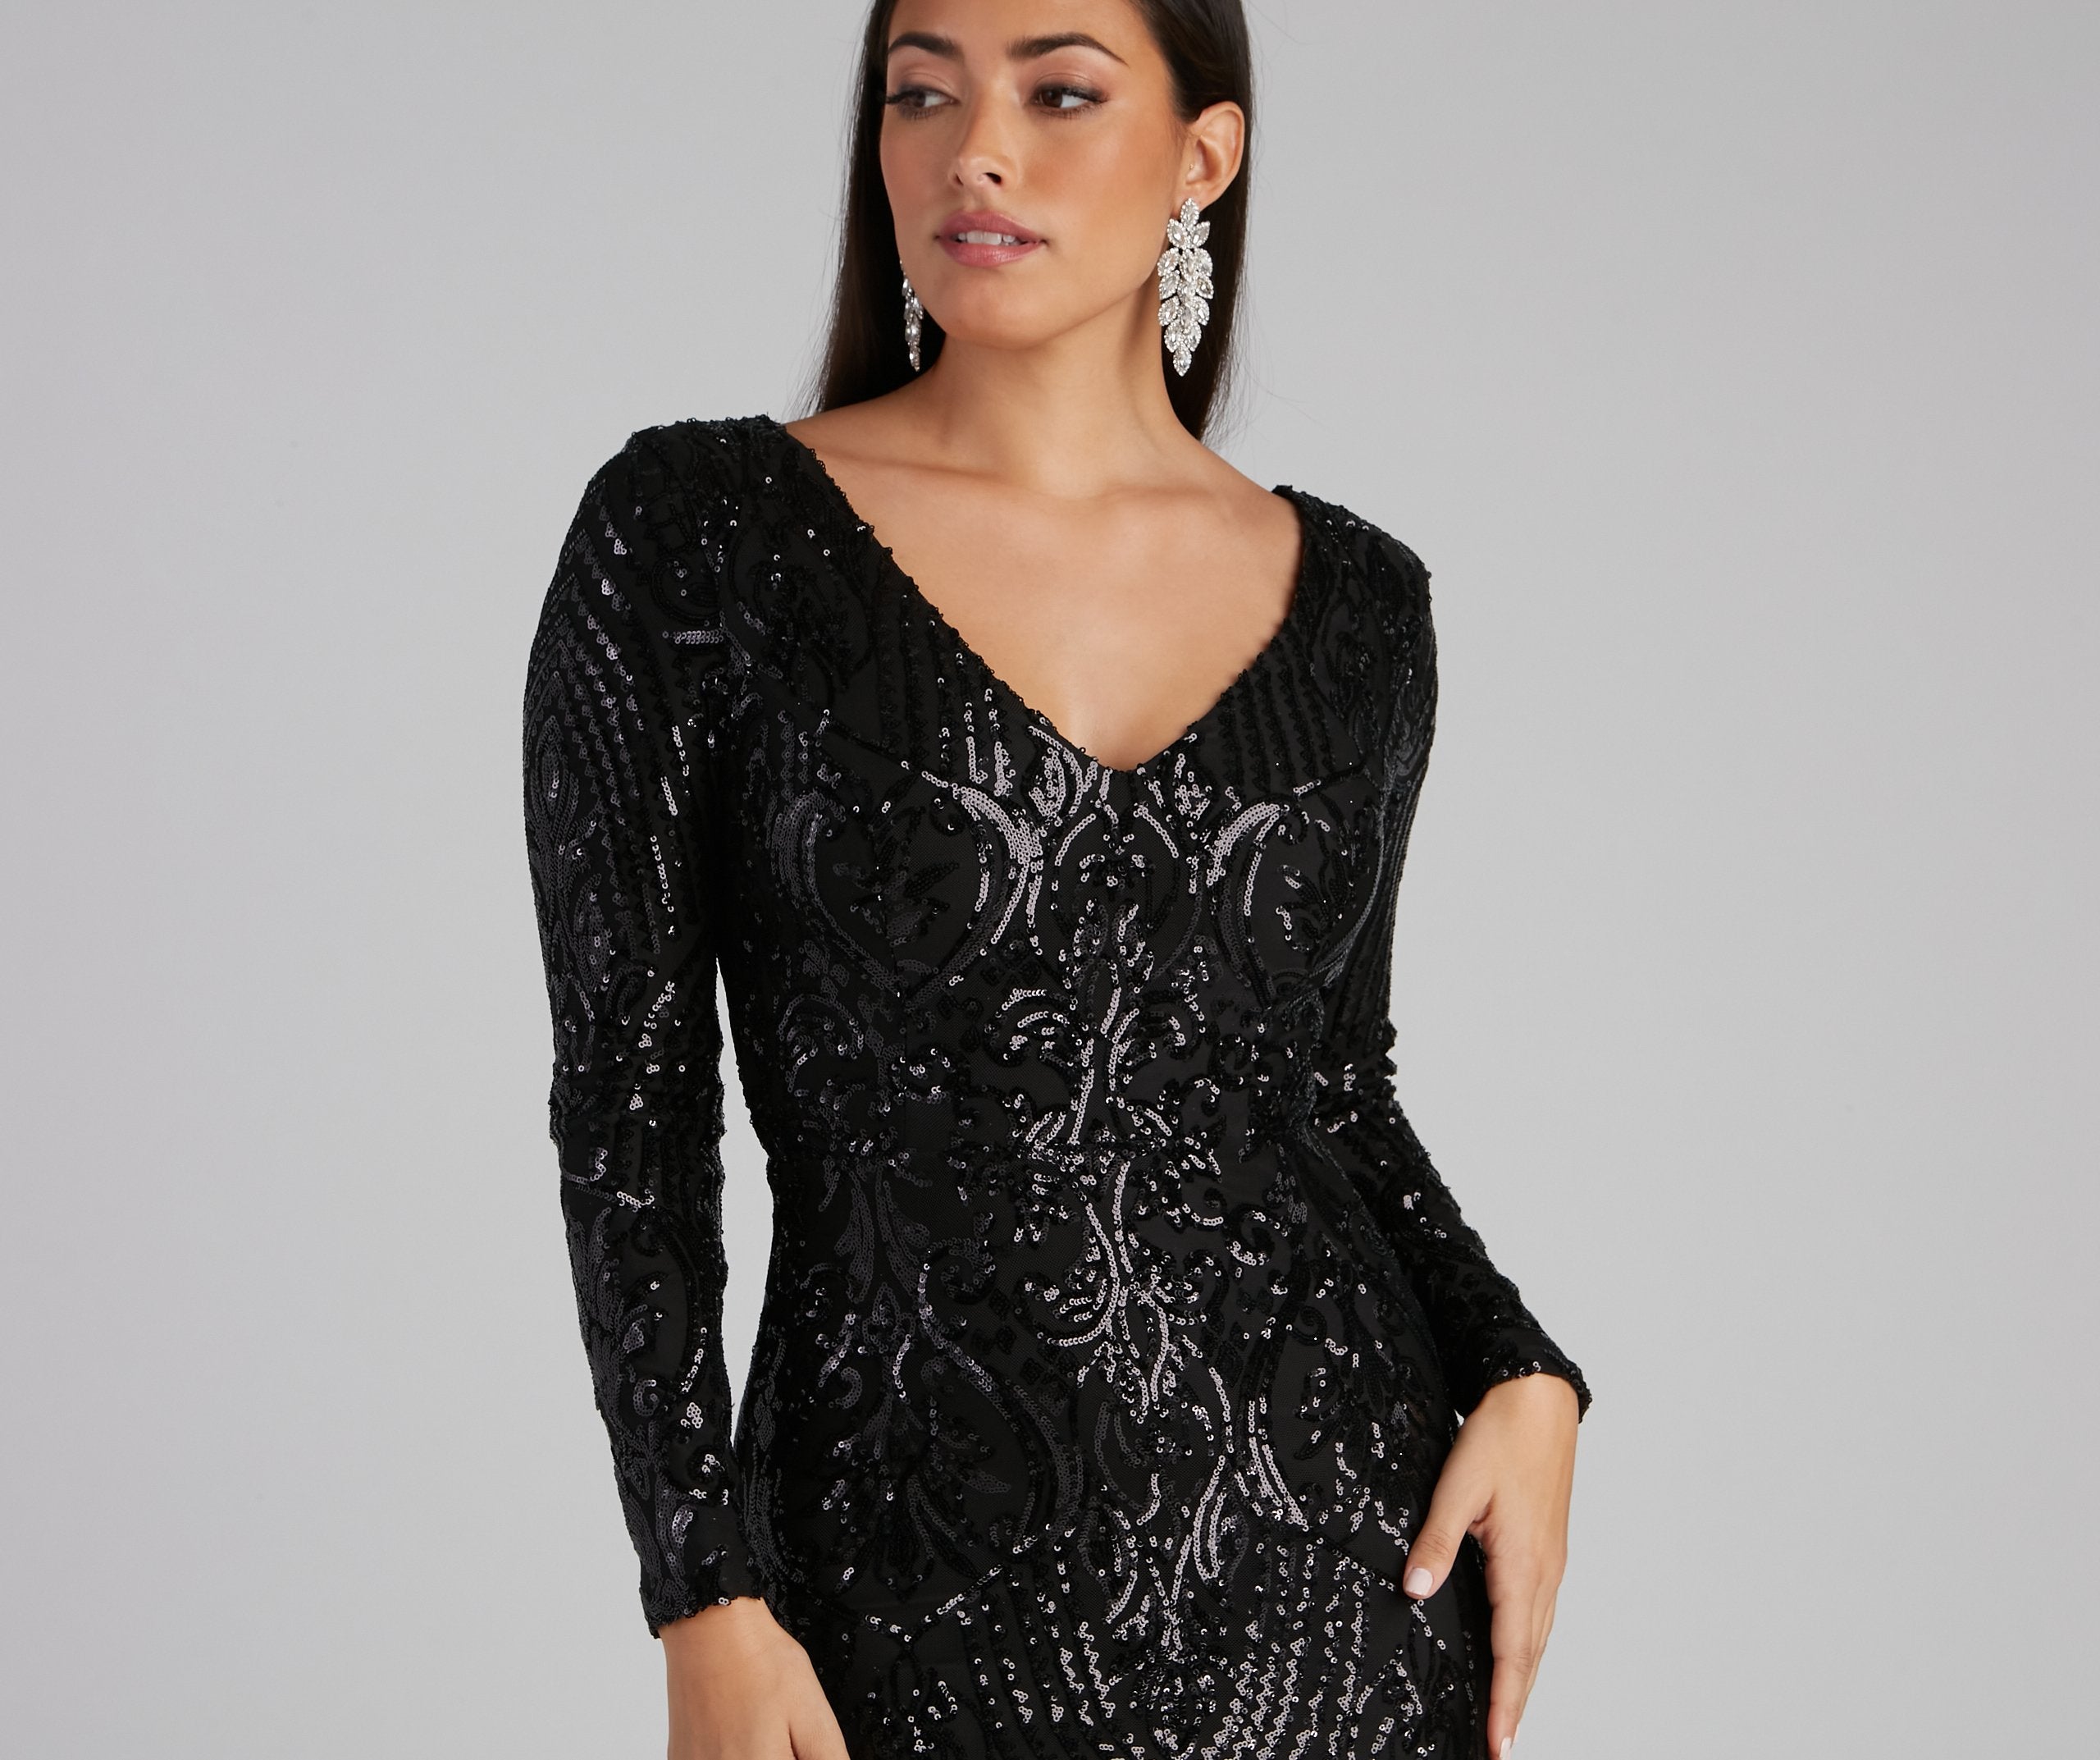 Ireland Formal Sequin Mermaid Dress - Lady Occasions